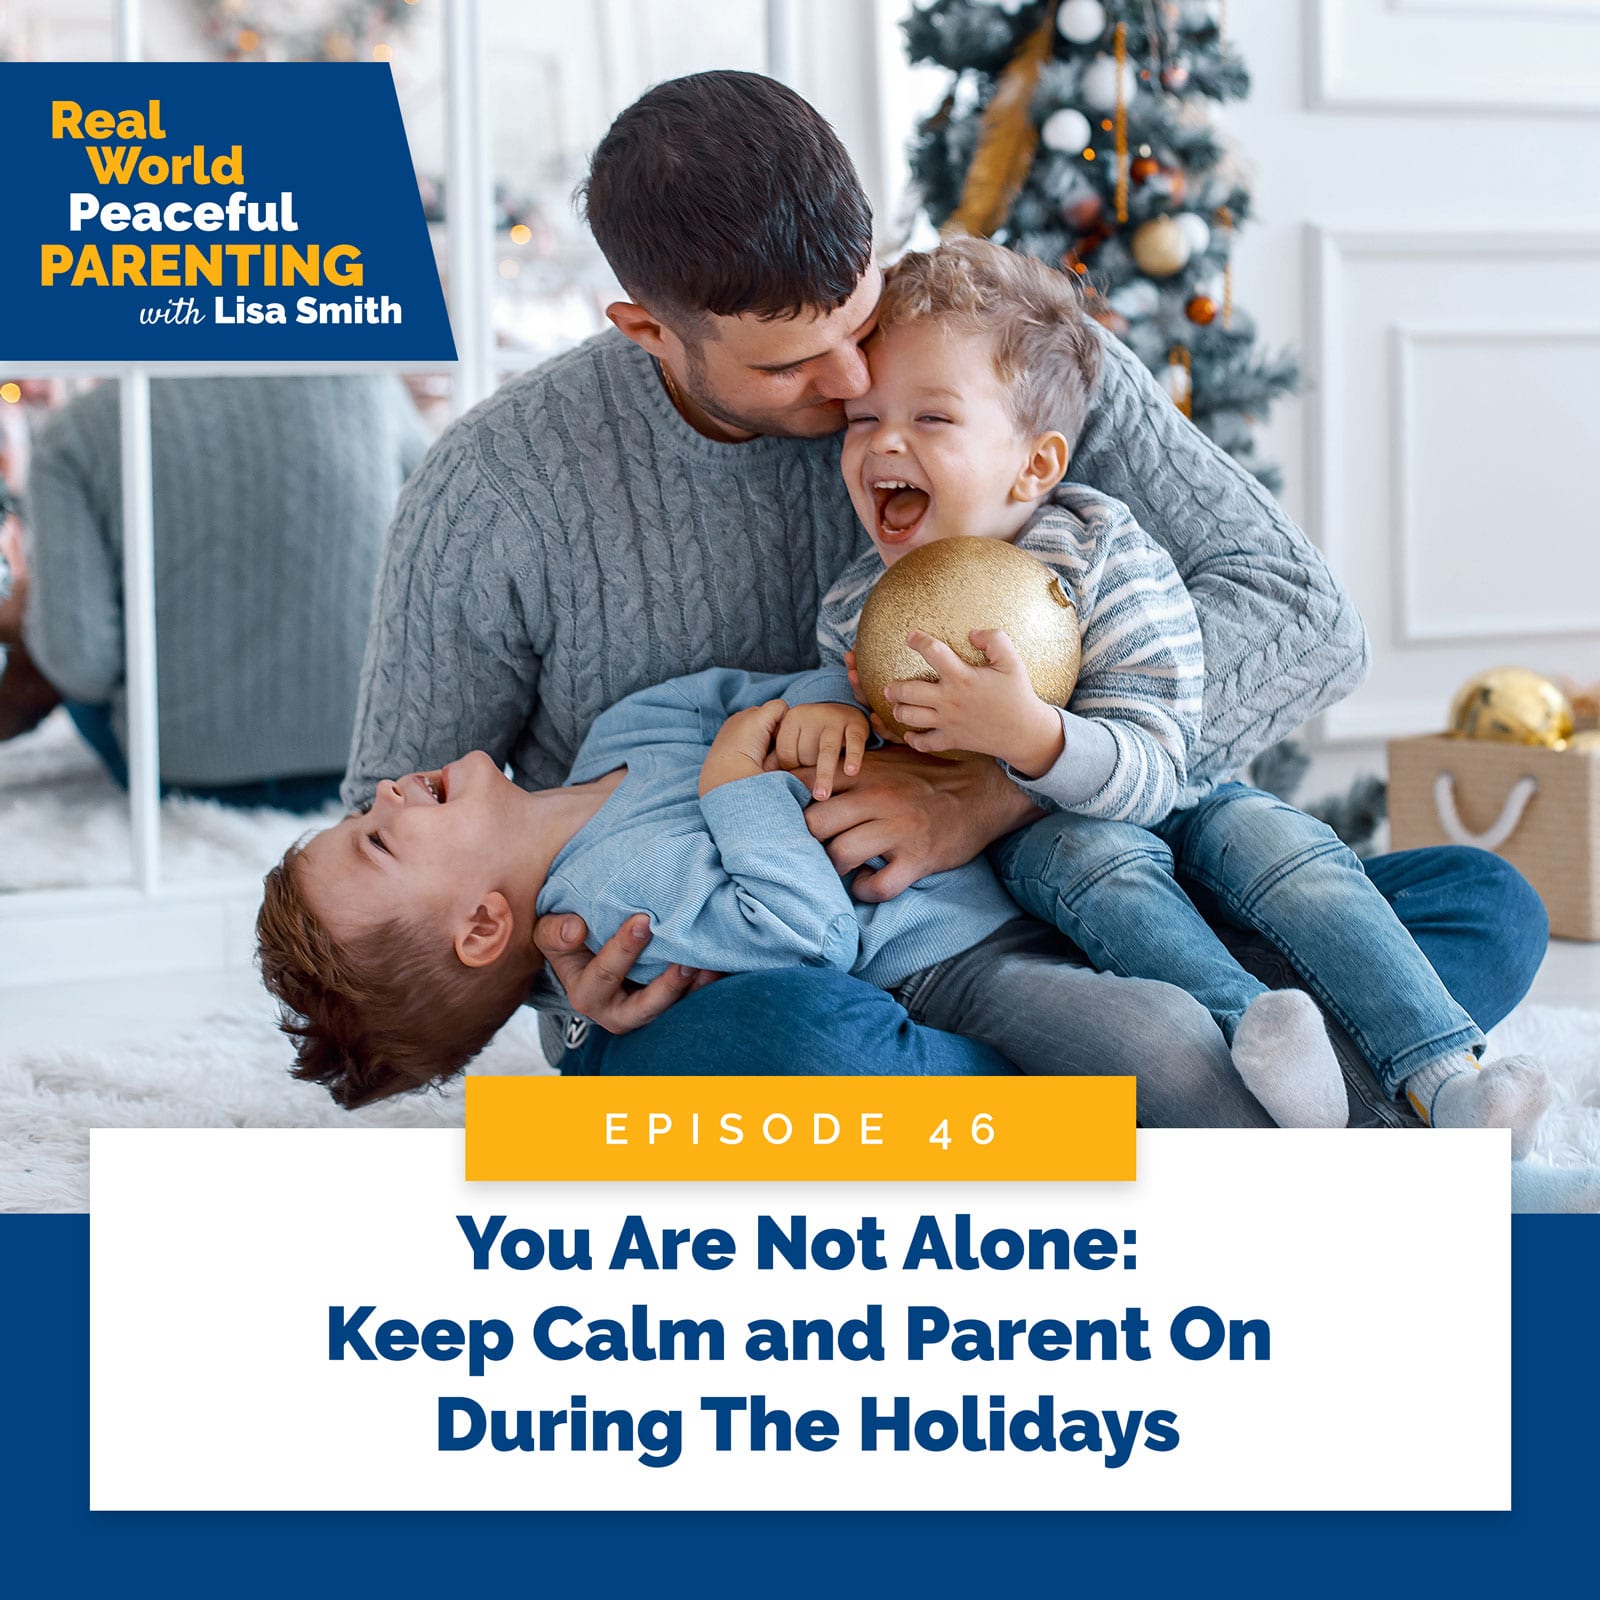 Real World Peaceful Parenting with Lisa Smith | You Are Not Alone: Keep Calm and Parent On During The Holidays